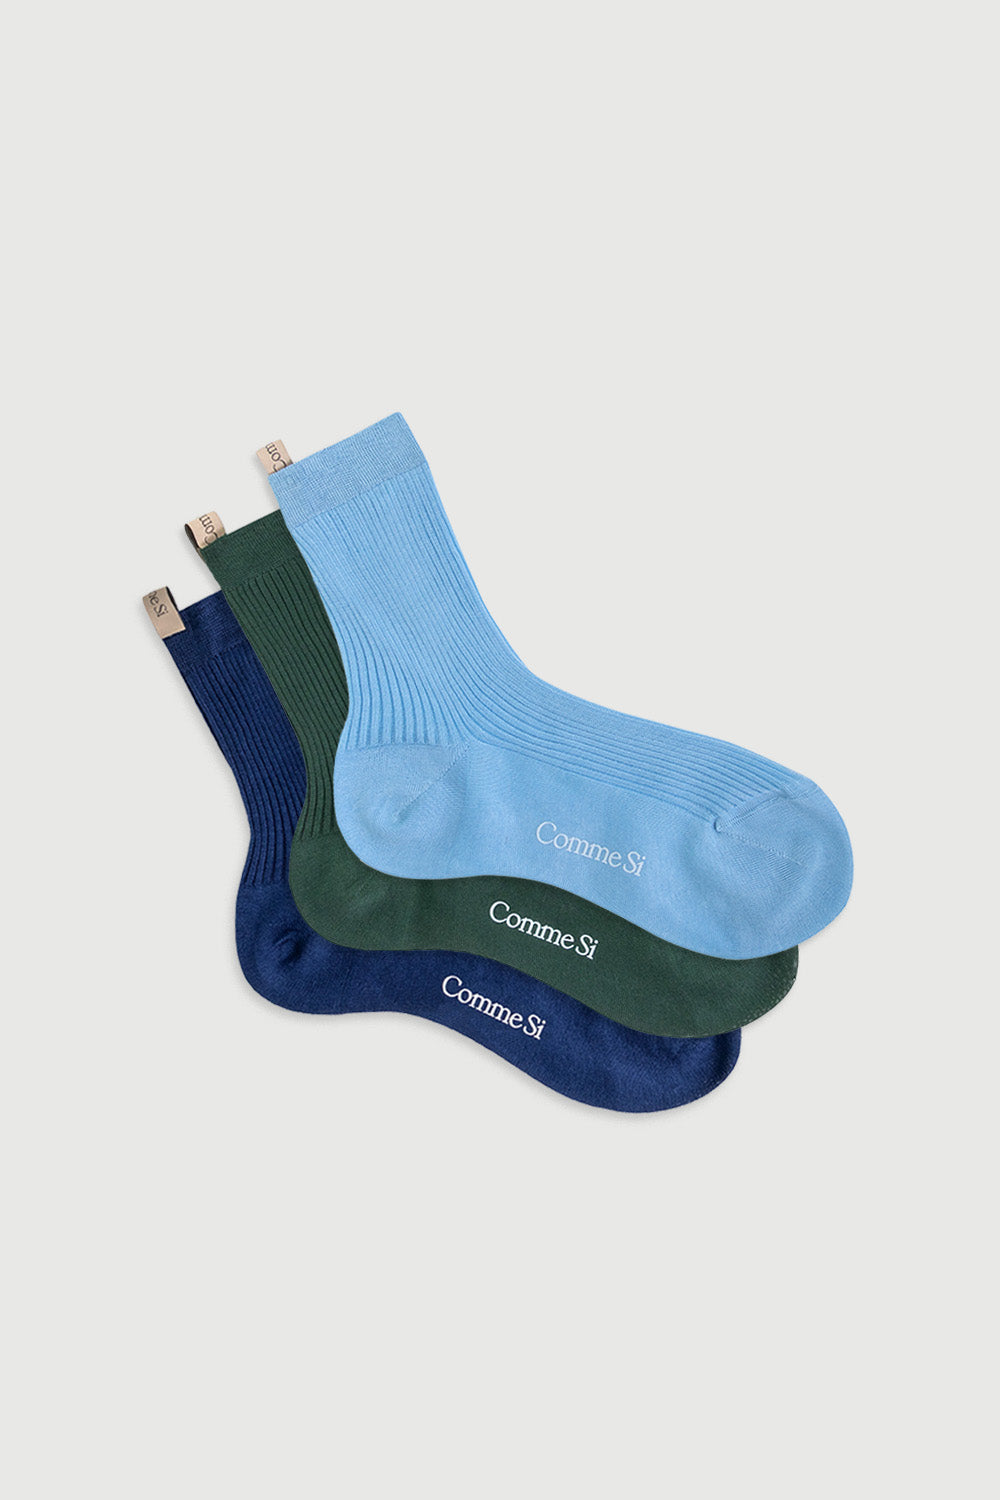 The Agnelli Trio, Egyptian Cotton Sock Set of three pairs in Pacific, by Comme Si